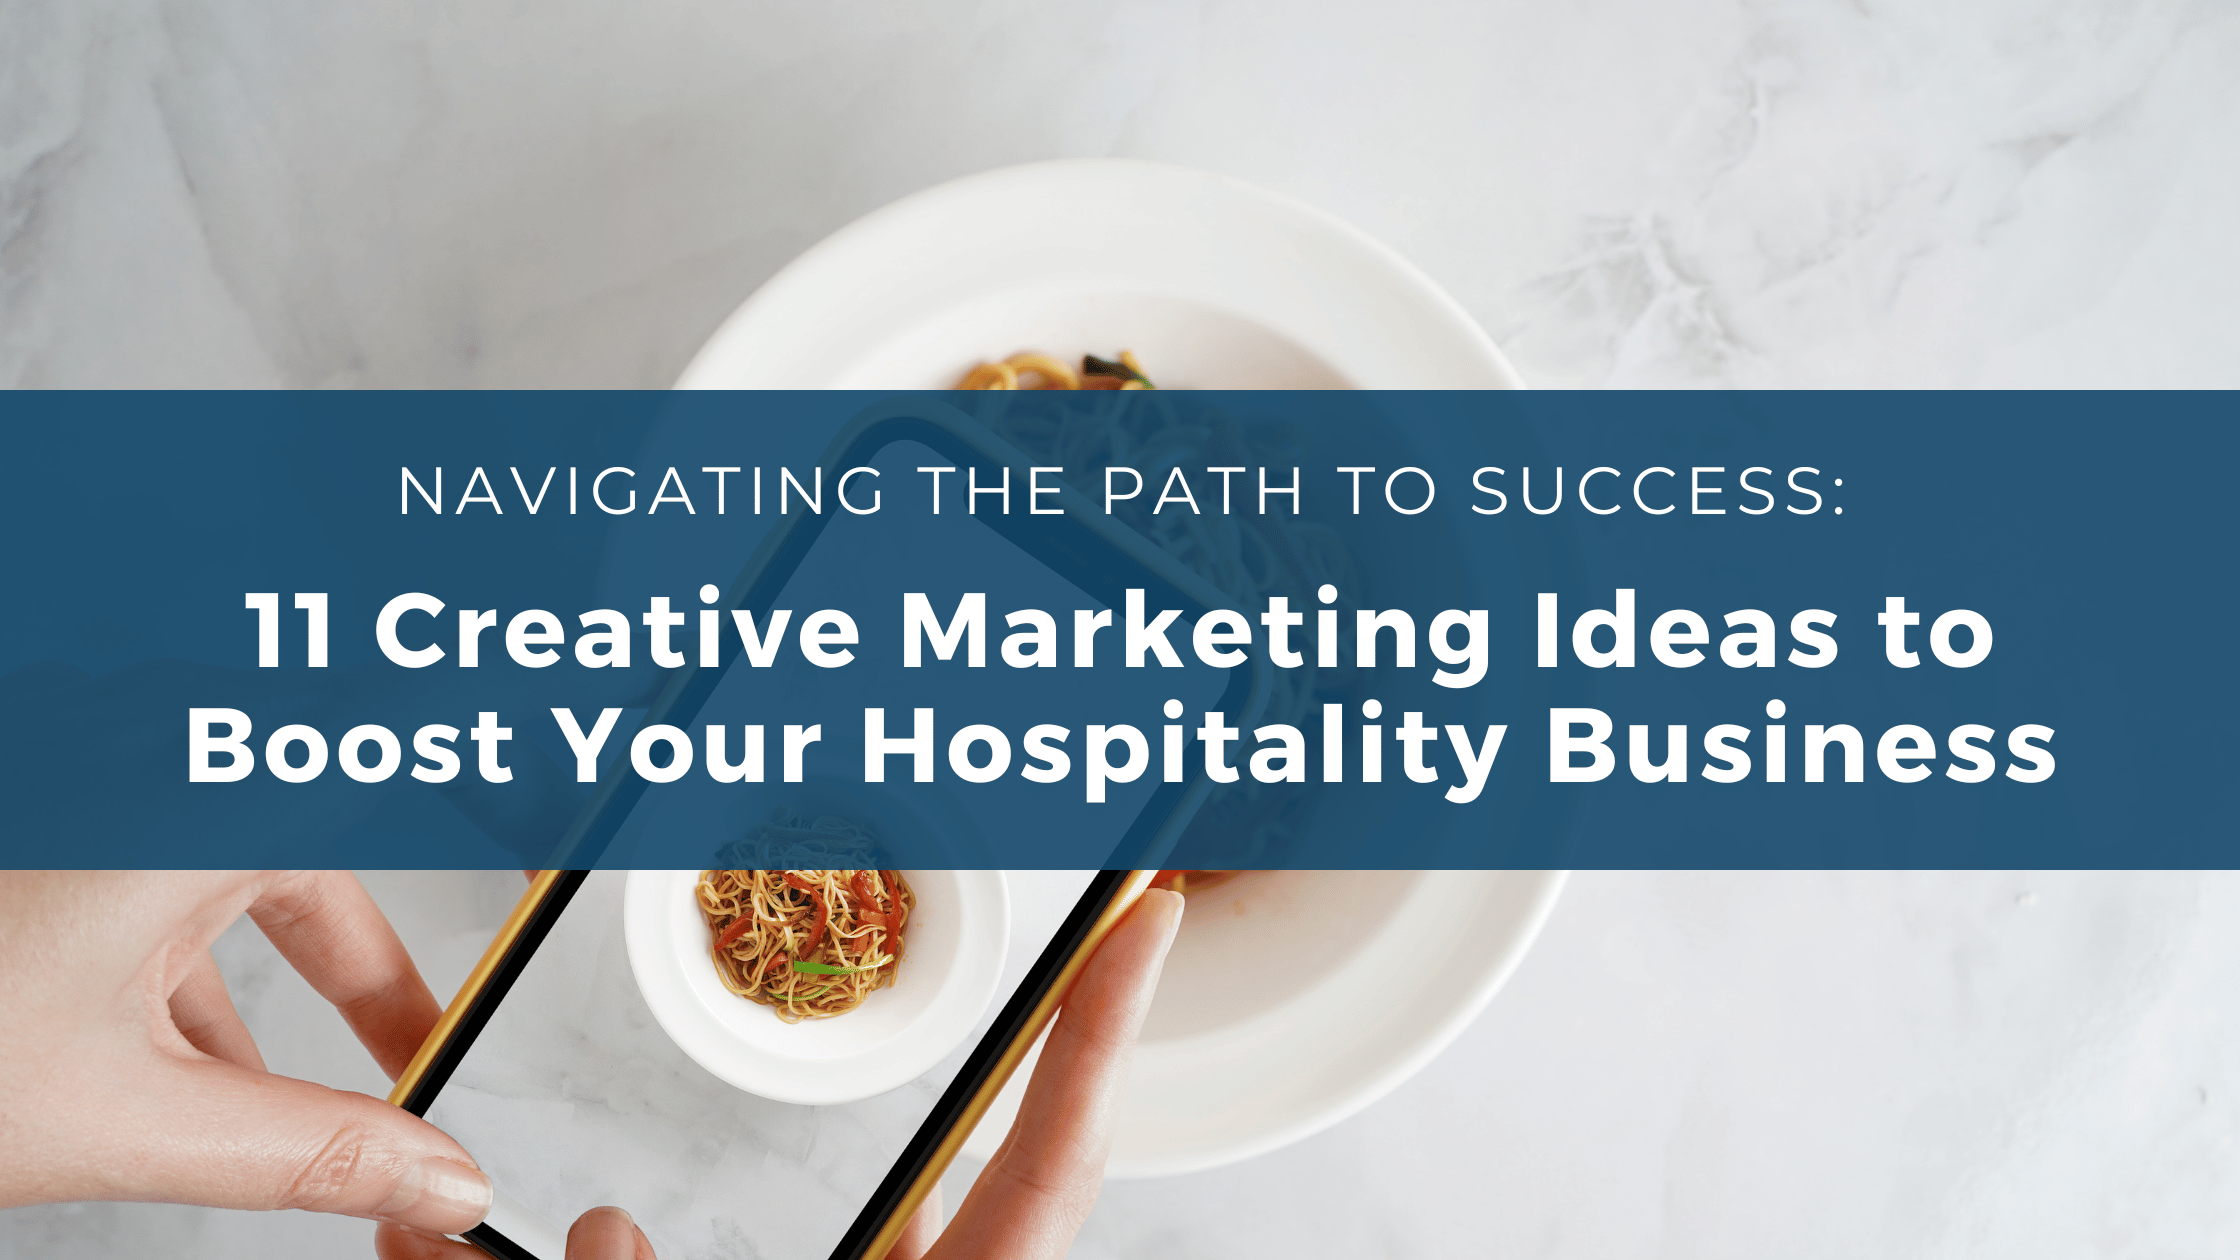 11 Creative Marketing Ideas to Boost Your Hospitality Business